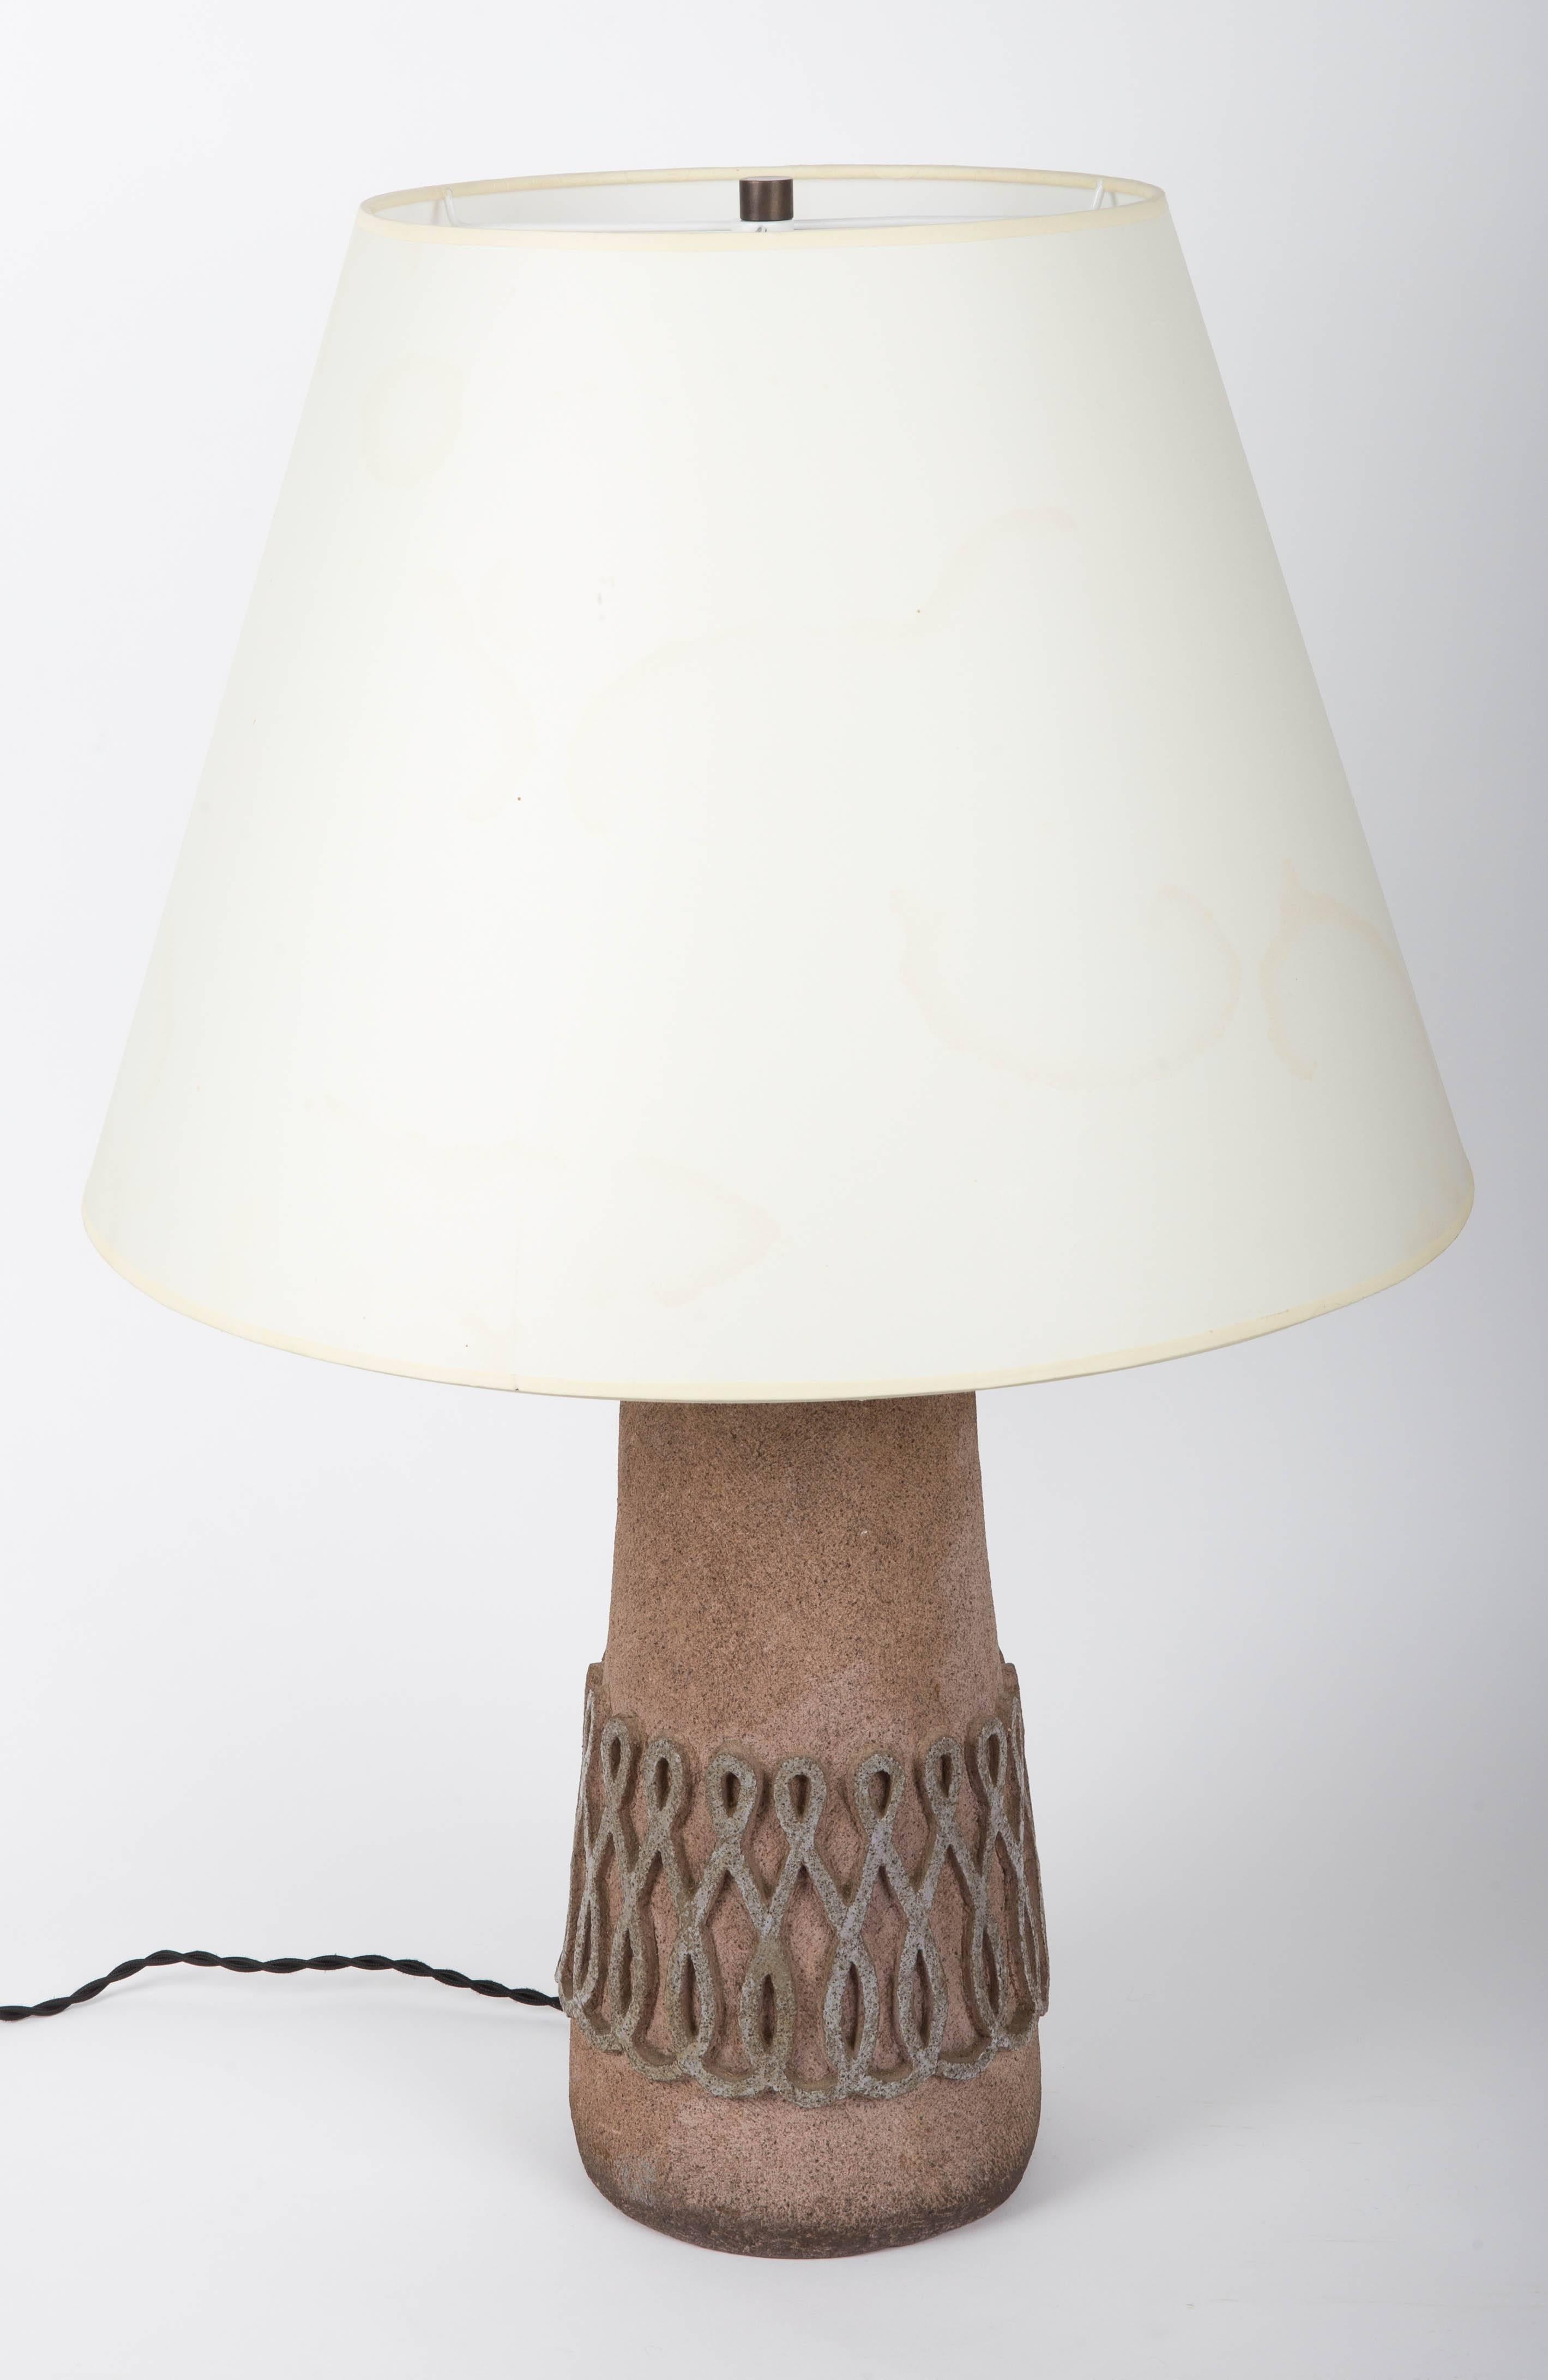 Textured stone table lamp, France, 20th Century. 

Handsome shape, earthen brown textured stone base, and stunning looped design that wraps around the entire base of the lamp. 

This light has been newly rewired and outfitted with a black twist silk